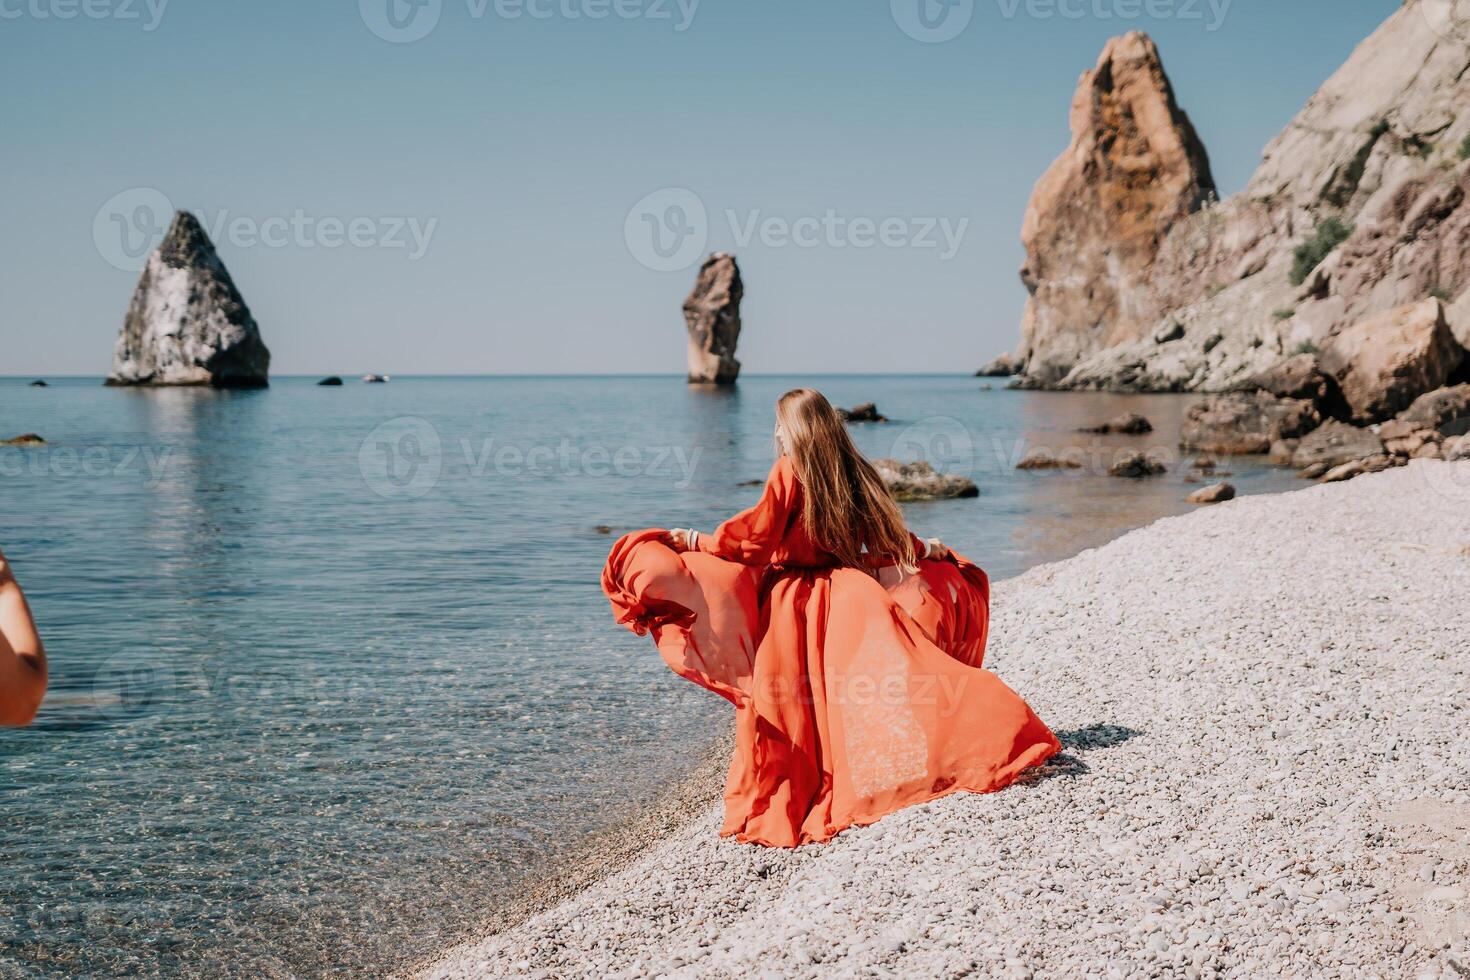 Woman travel sea. Happy tourist in red dress enjoy taking picture outdoors for memories. Woman traveler posing on the rock at sea bay surrounded by volcanic mountains, sharing travel adventure journey photo